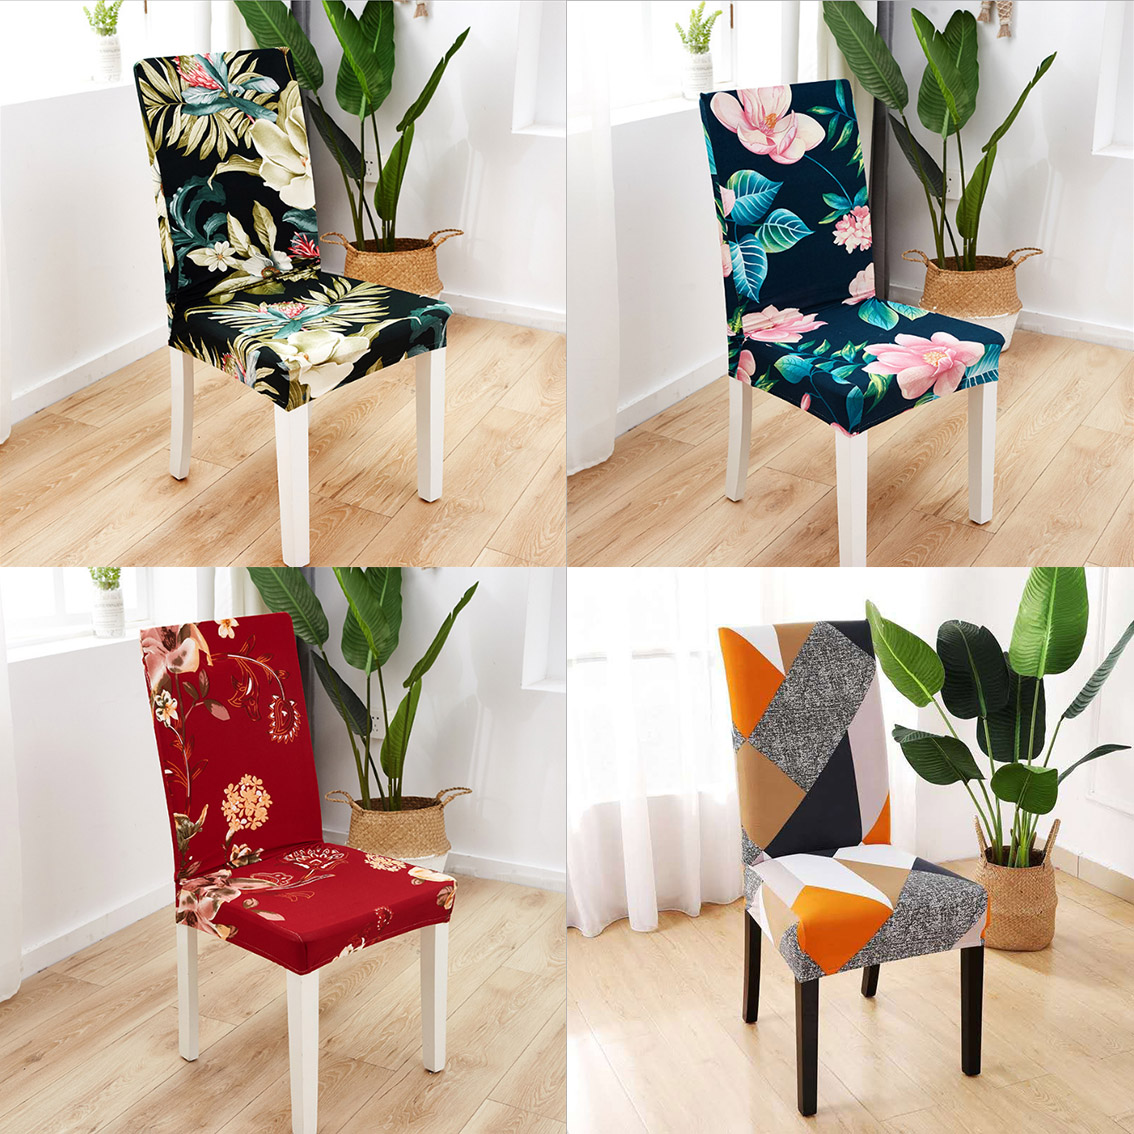 Set of 2 Flamingo P Dining Chair Seat Cover Stretch Spandex Chair Seat Covers Chair Seat Cushion Slipcovers for Dining Room Chairs Removable Washable Chair Seat Covers Black